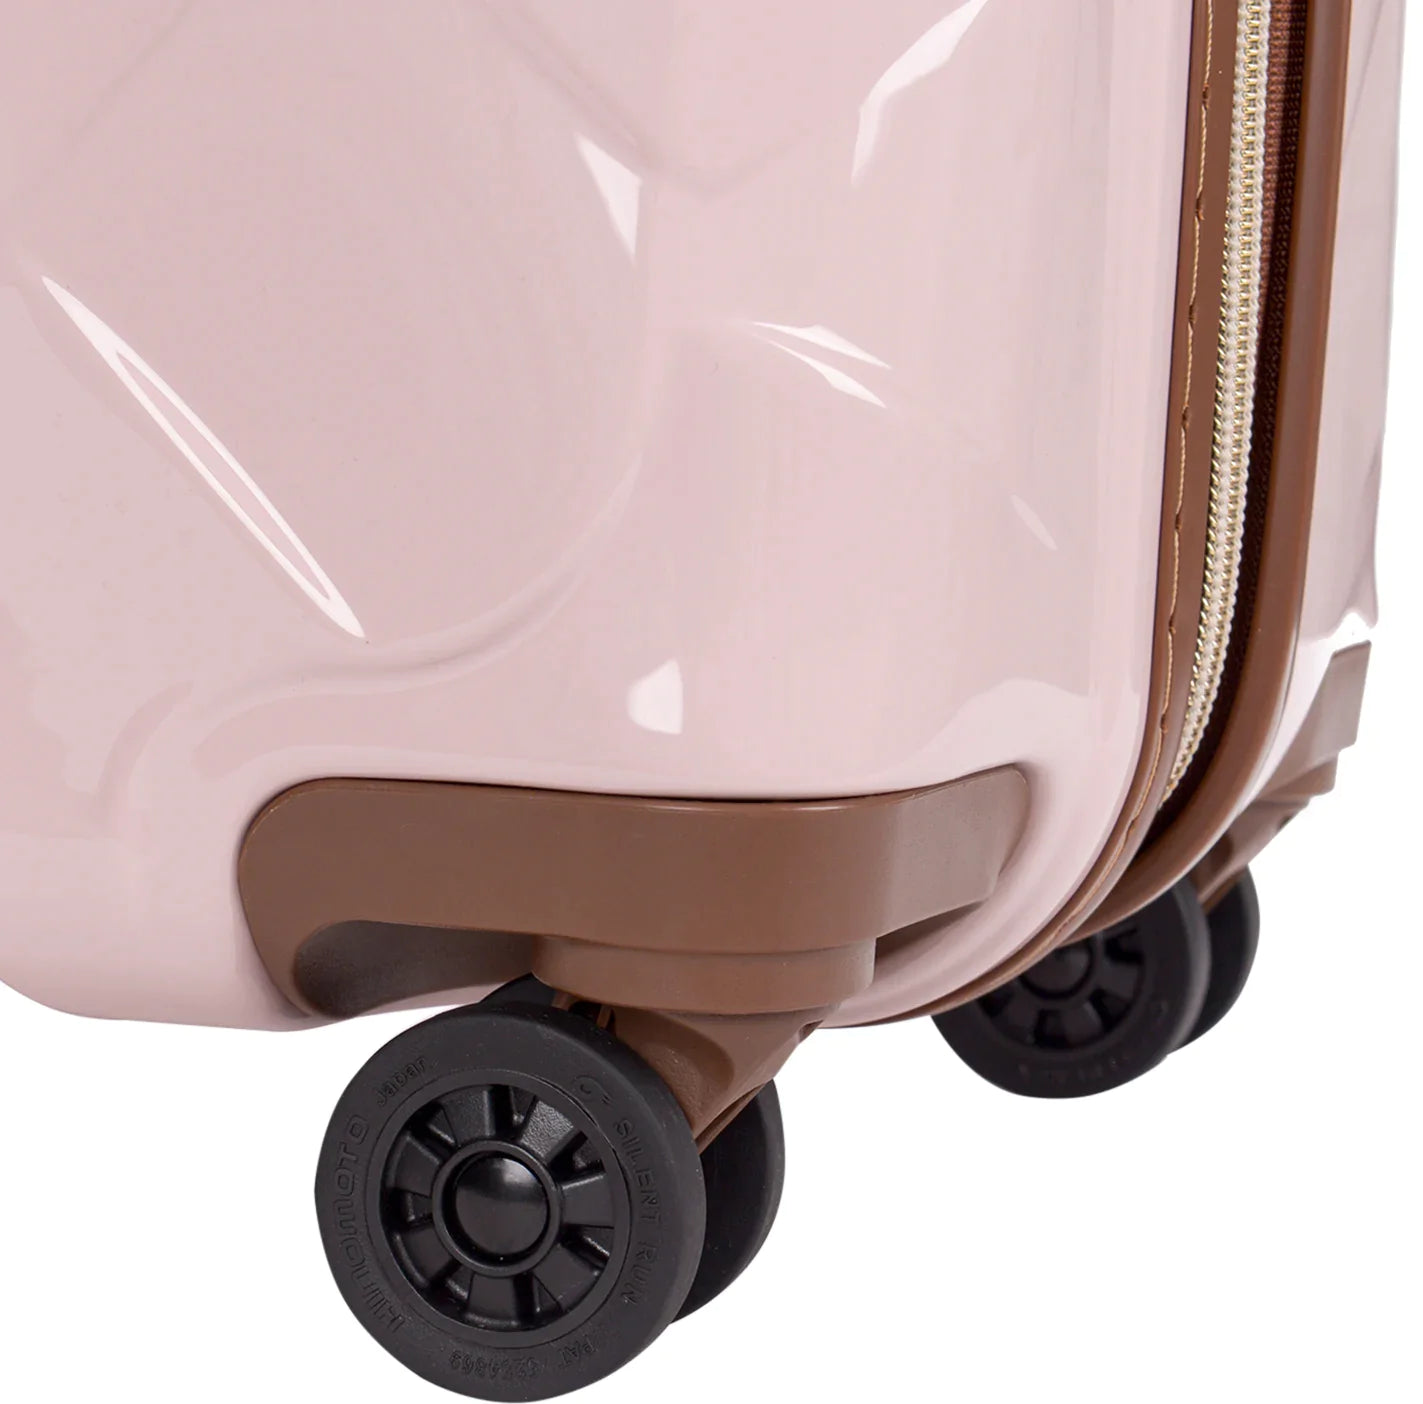 Stratic Leather & More 4-Rollen-Trolley 66 cm - champagne